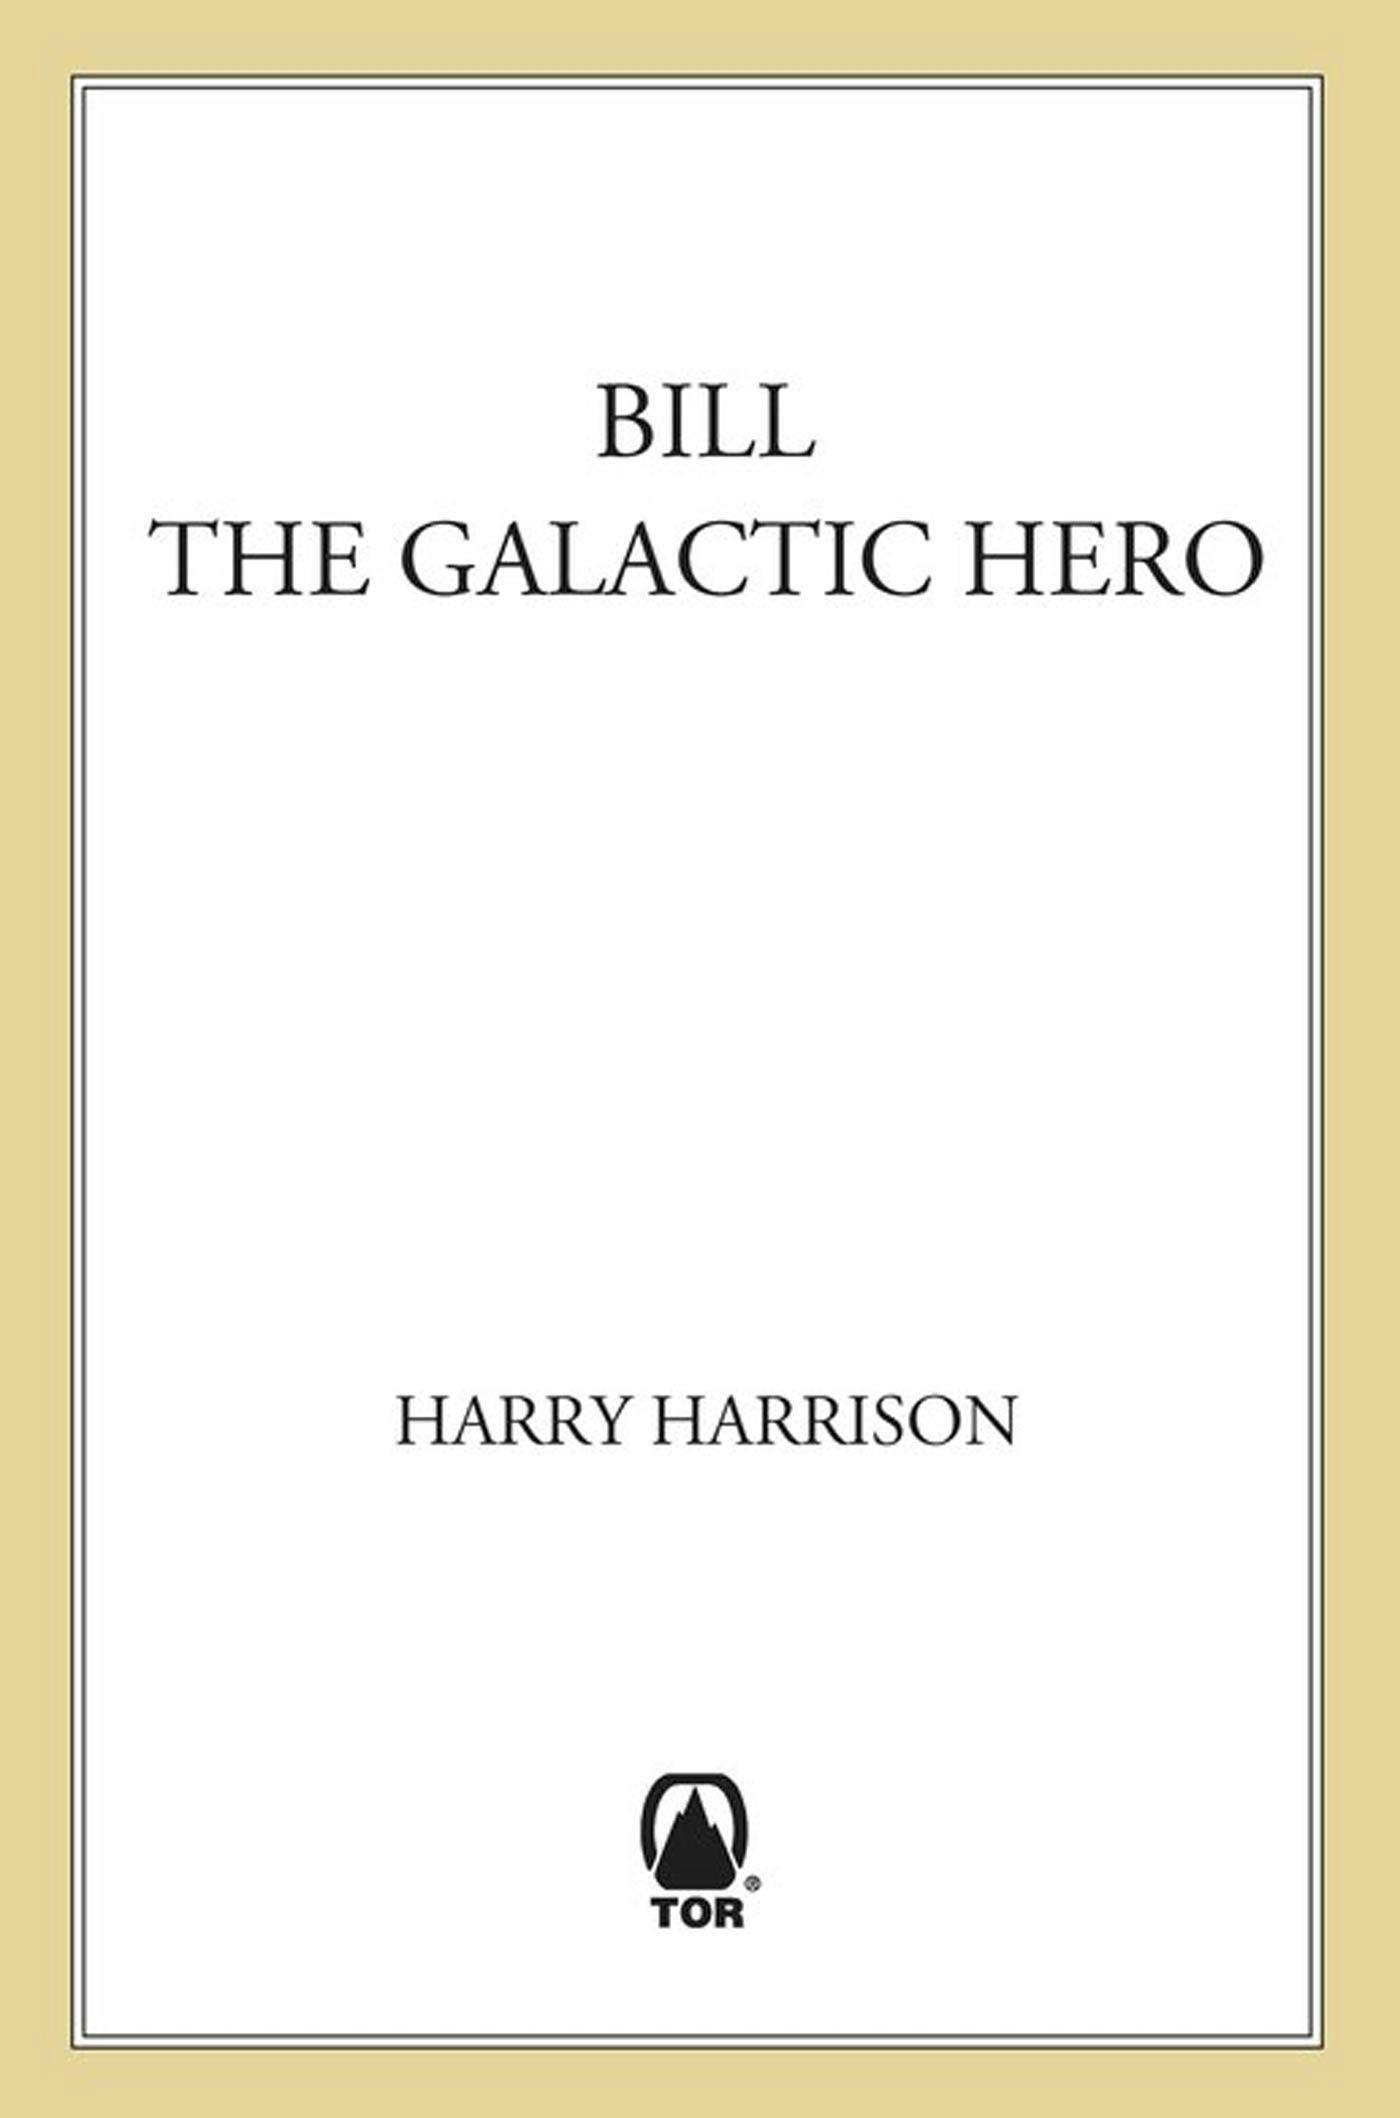 Cover for the book titled as: Bill, The Galactic Hero